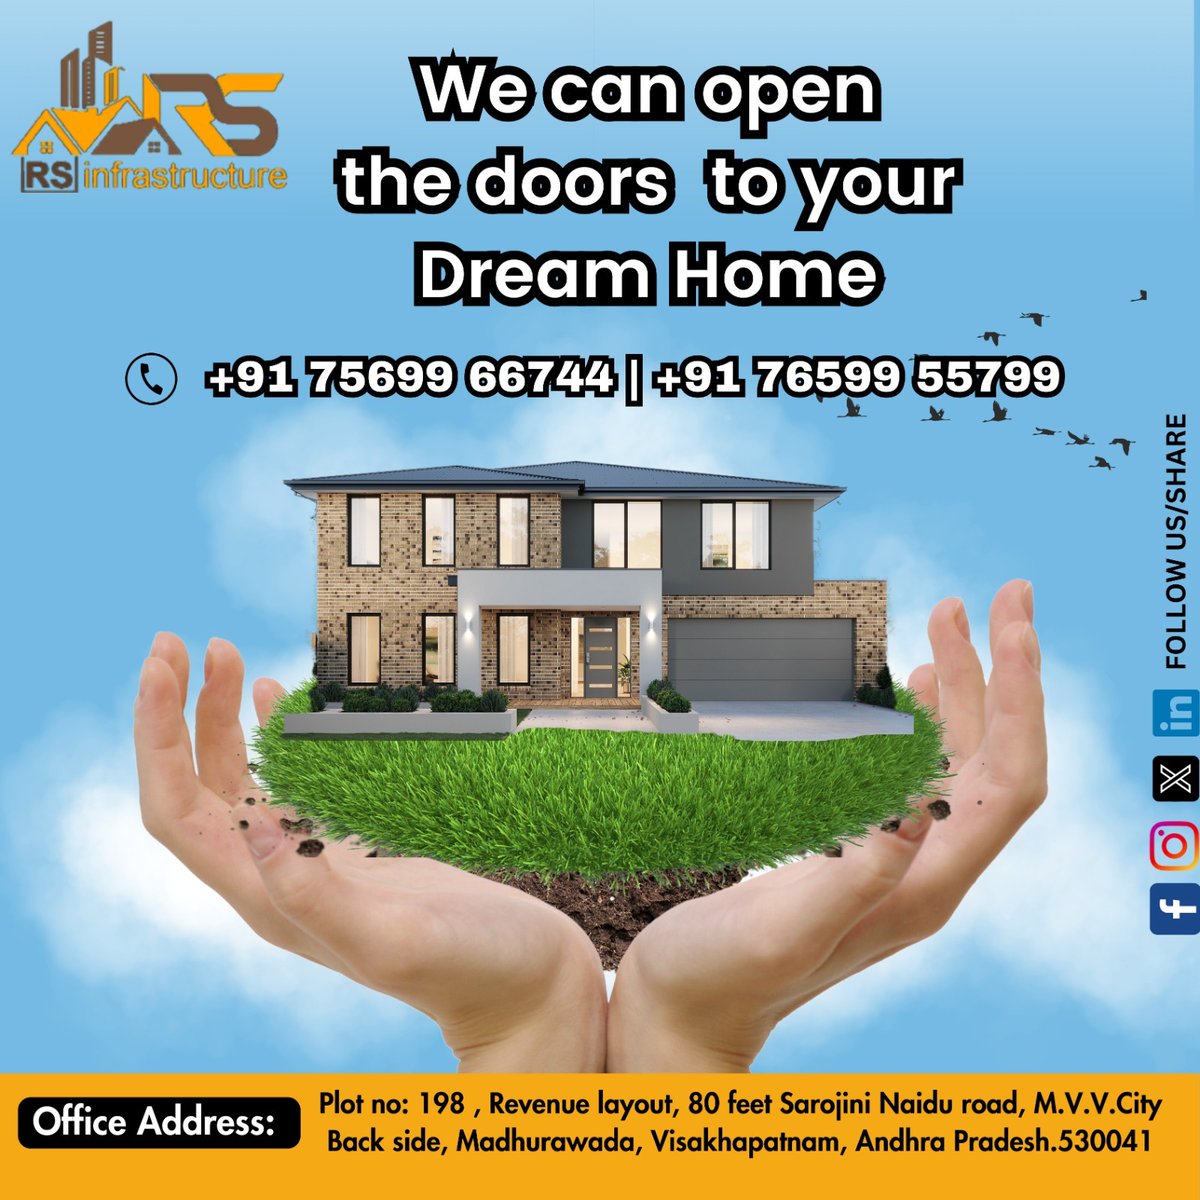 Building dreams, one brick at a time! Let R S Infrastructure craft your ideal sanctuary.🌟

Contact Us: +91 75699 66744 +91 76599 55799

#RSInfrastructure #DreamHome #TrustInConstruction #BuildingDreams #HomeConstruction #FoundationOfTrust #RealEstateJourney #HomeBuildingExperts